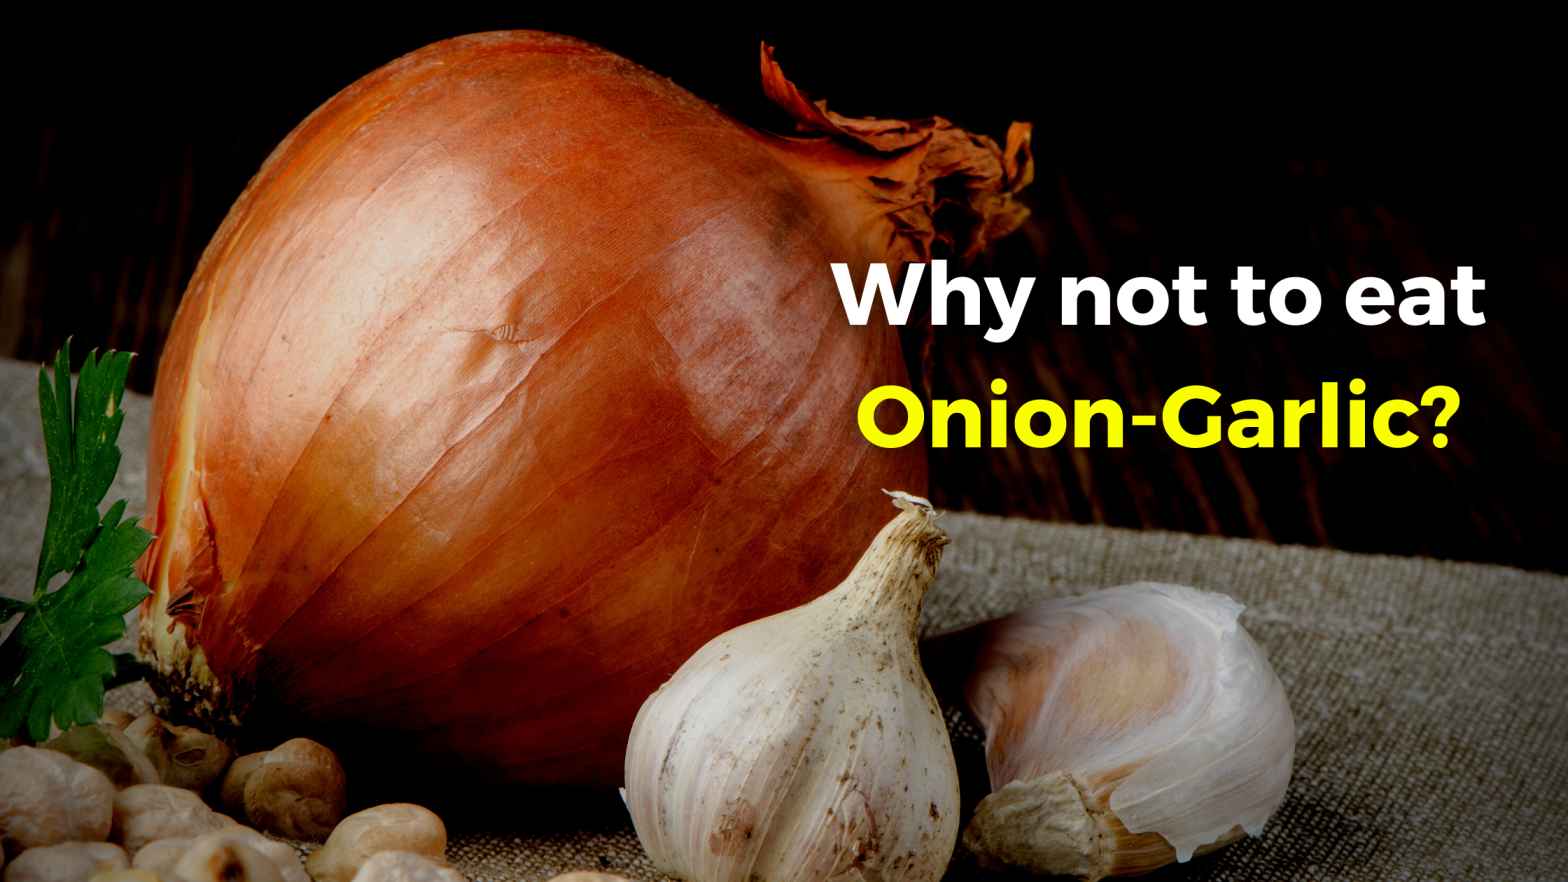 Why not to eat onion and garlic?